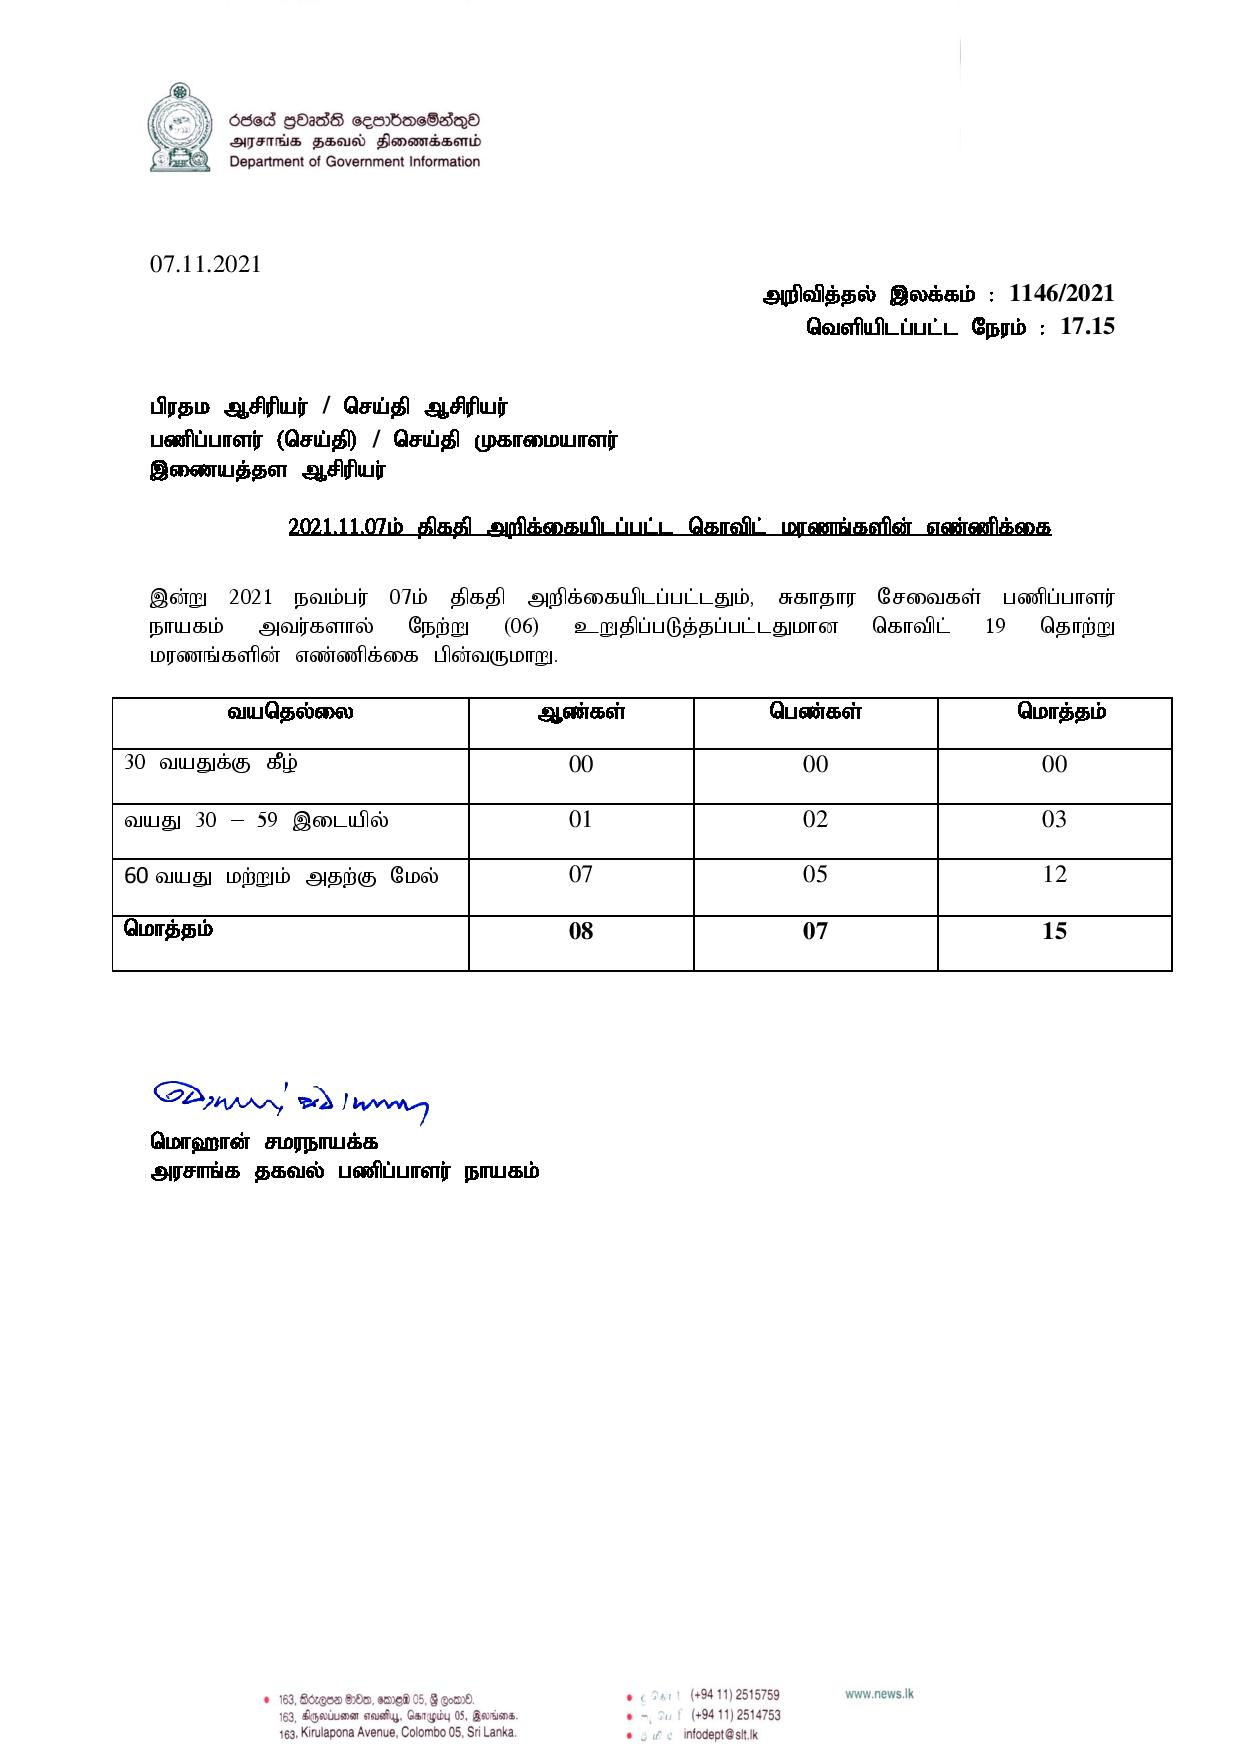 Release No 1146 Tamil page 001